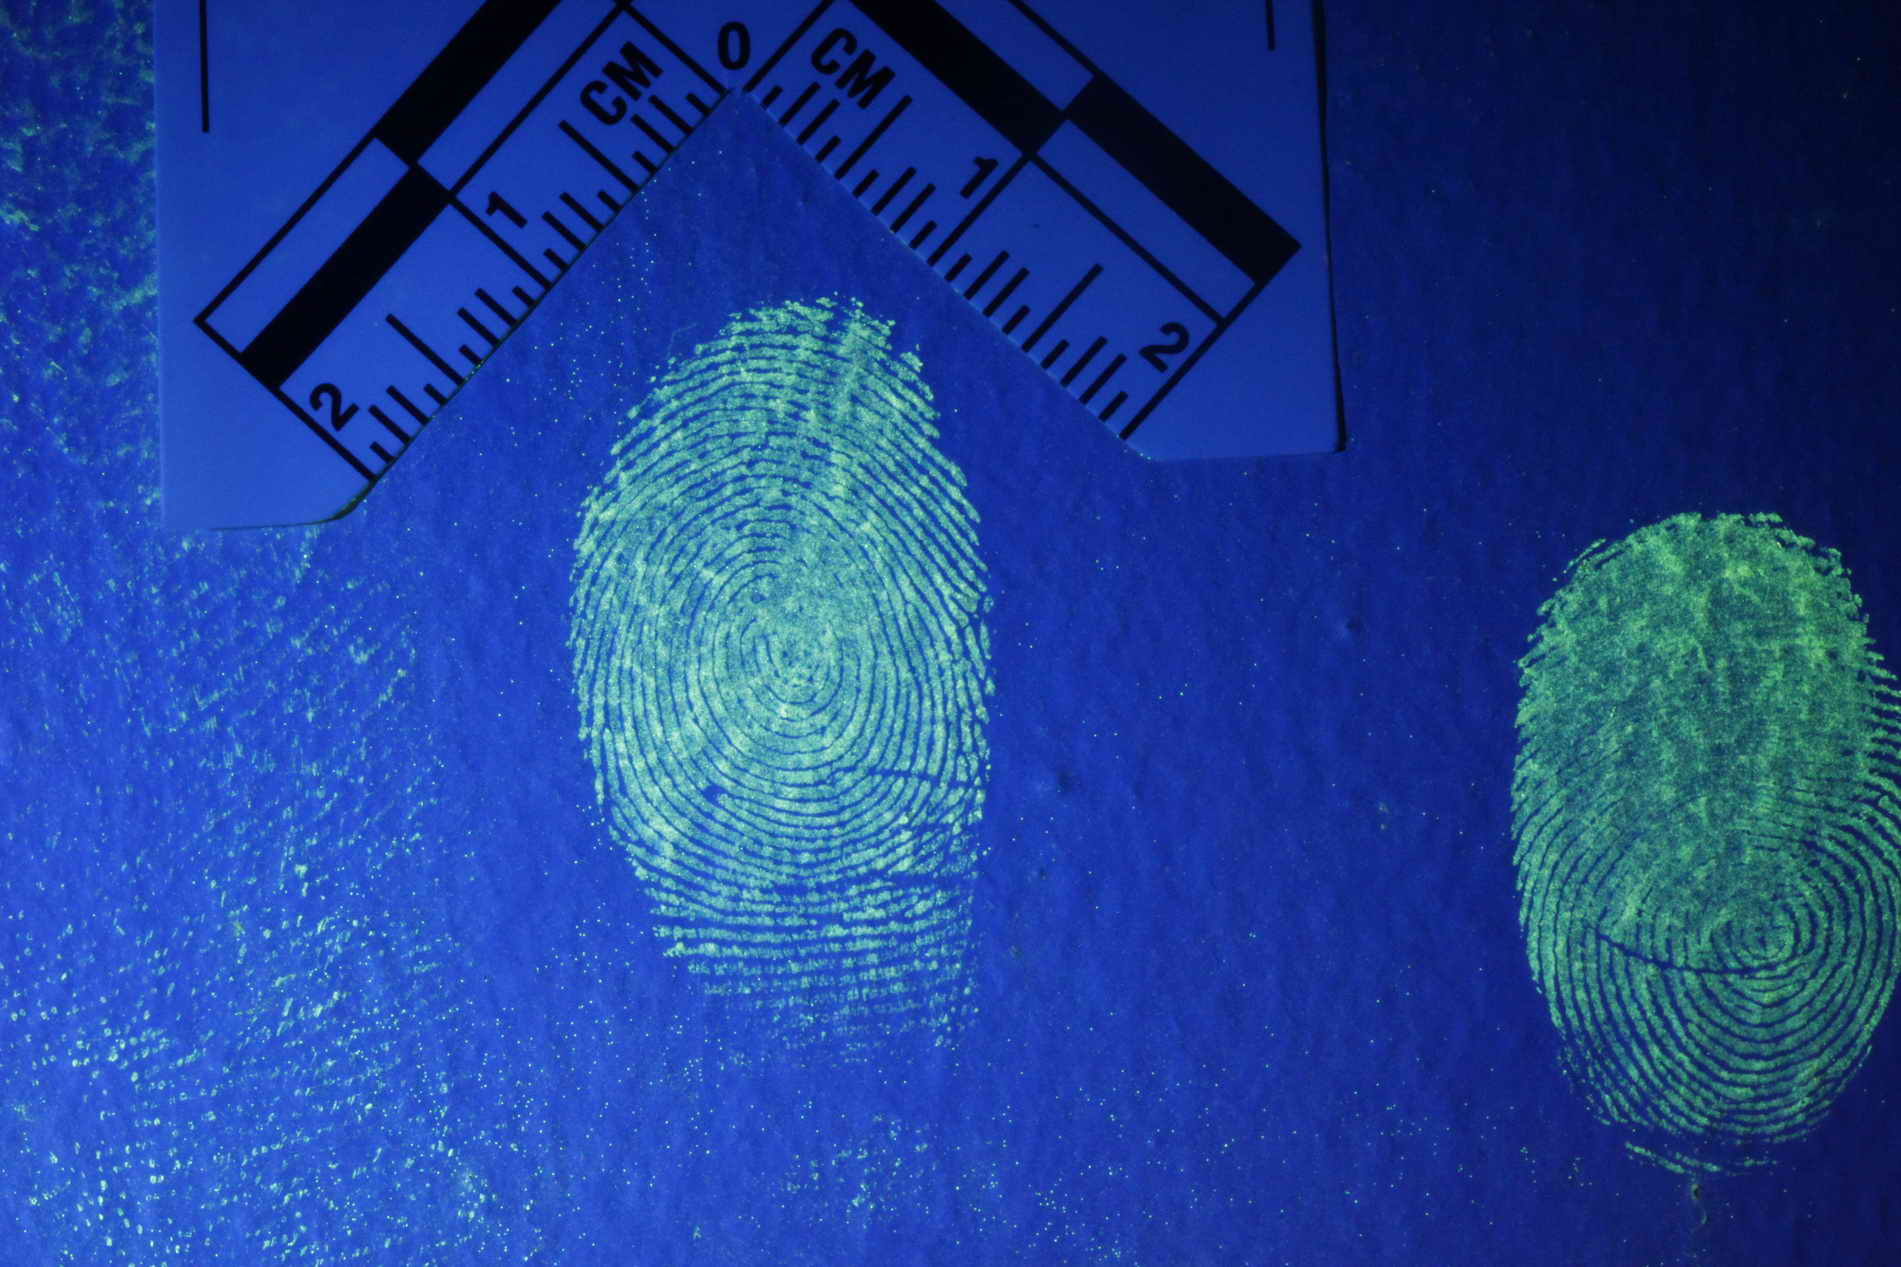 Fingerprints visible with the Polilight forensic lamp, image courtesy Rofin Australia Pty Ltd